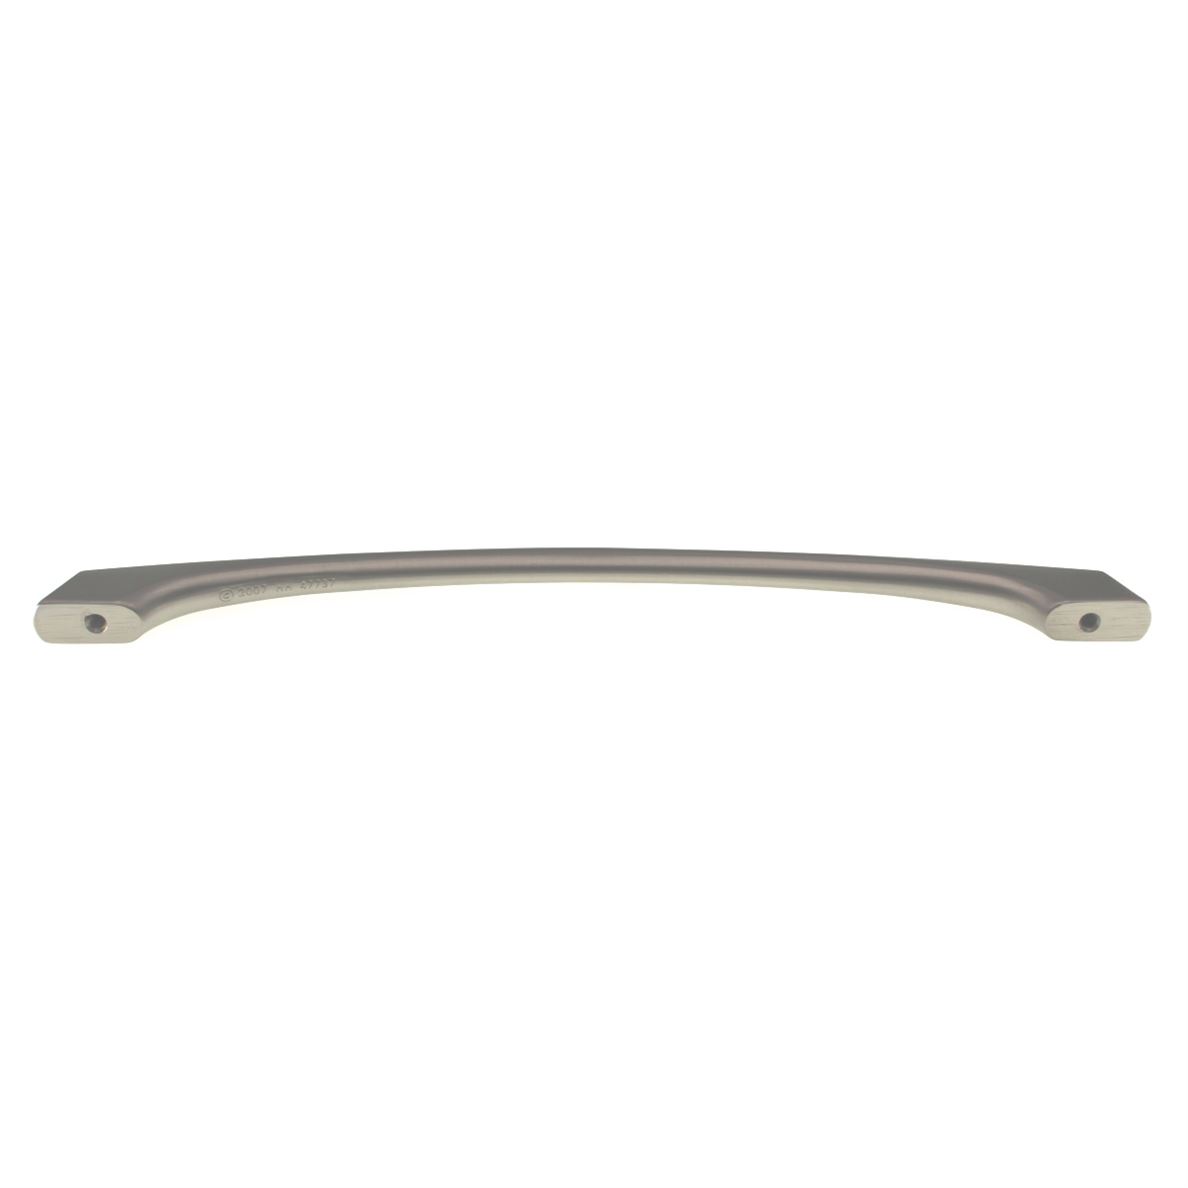 Hickory Hardware Greenwich Satin Nickel 8.82" (224mm) Ctr. Cabinet Pull P3041-SS